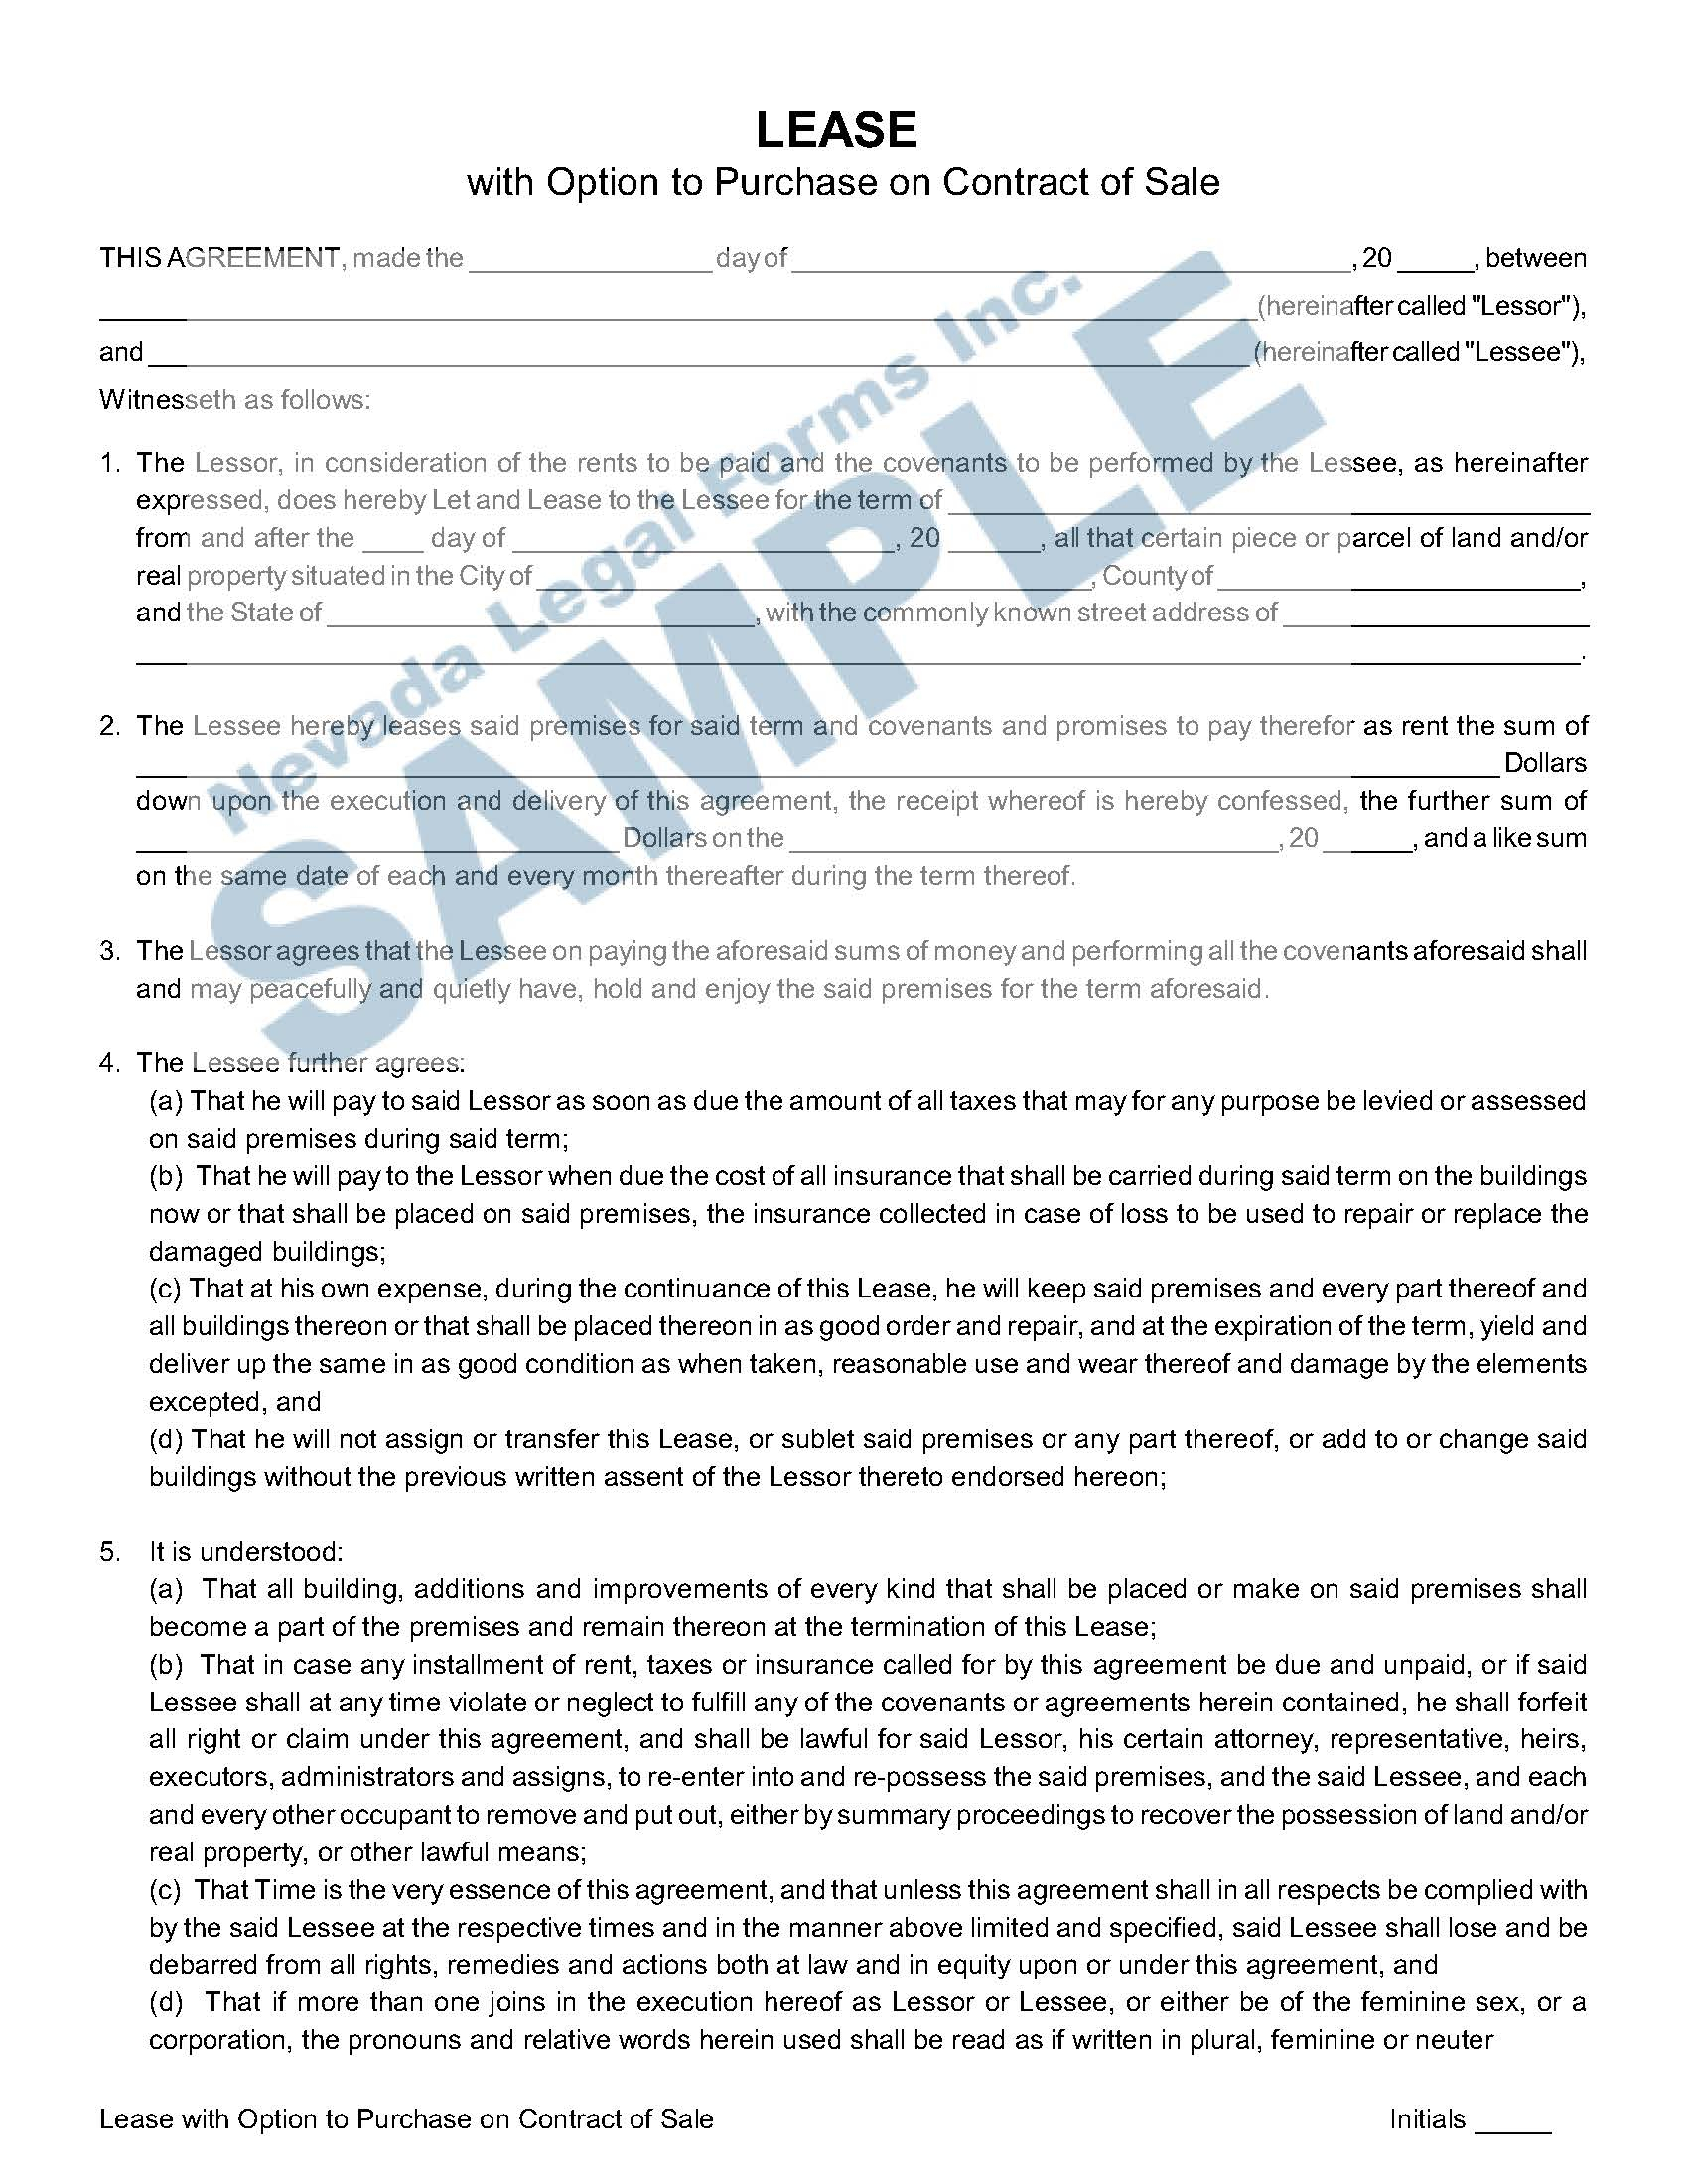 Legal Forms Lease Agreement Lease With Option To Purchase On Contract Of Sale